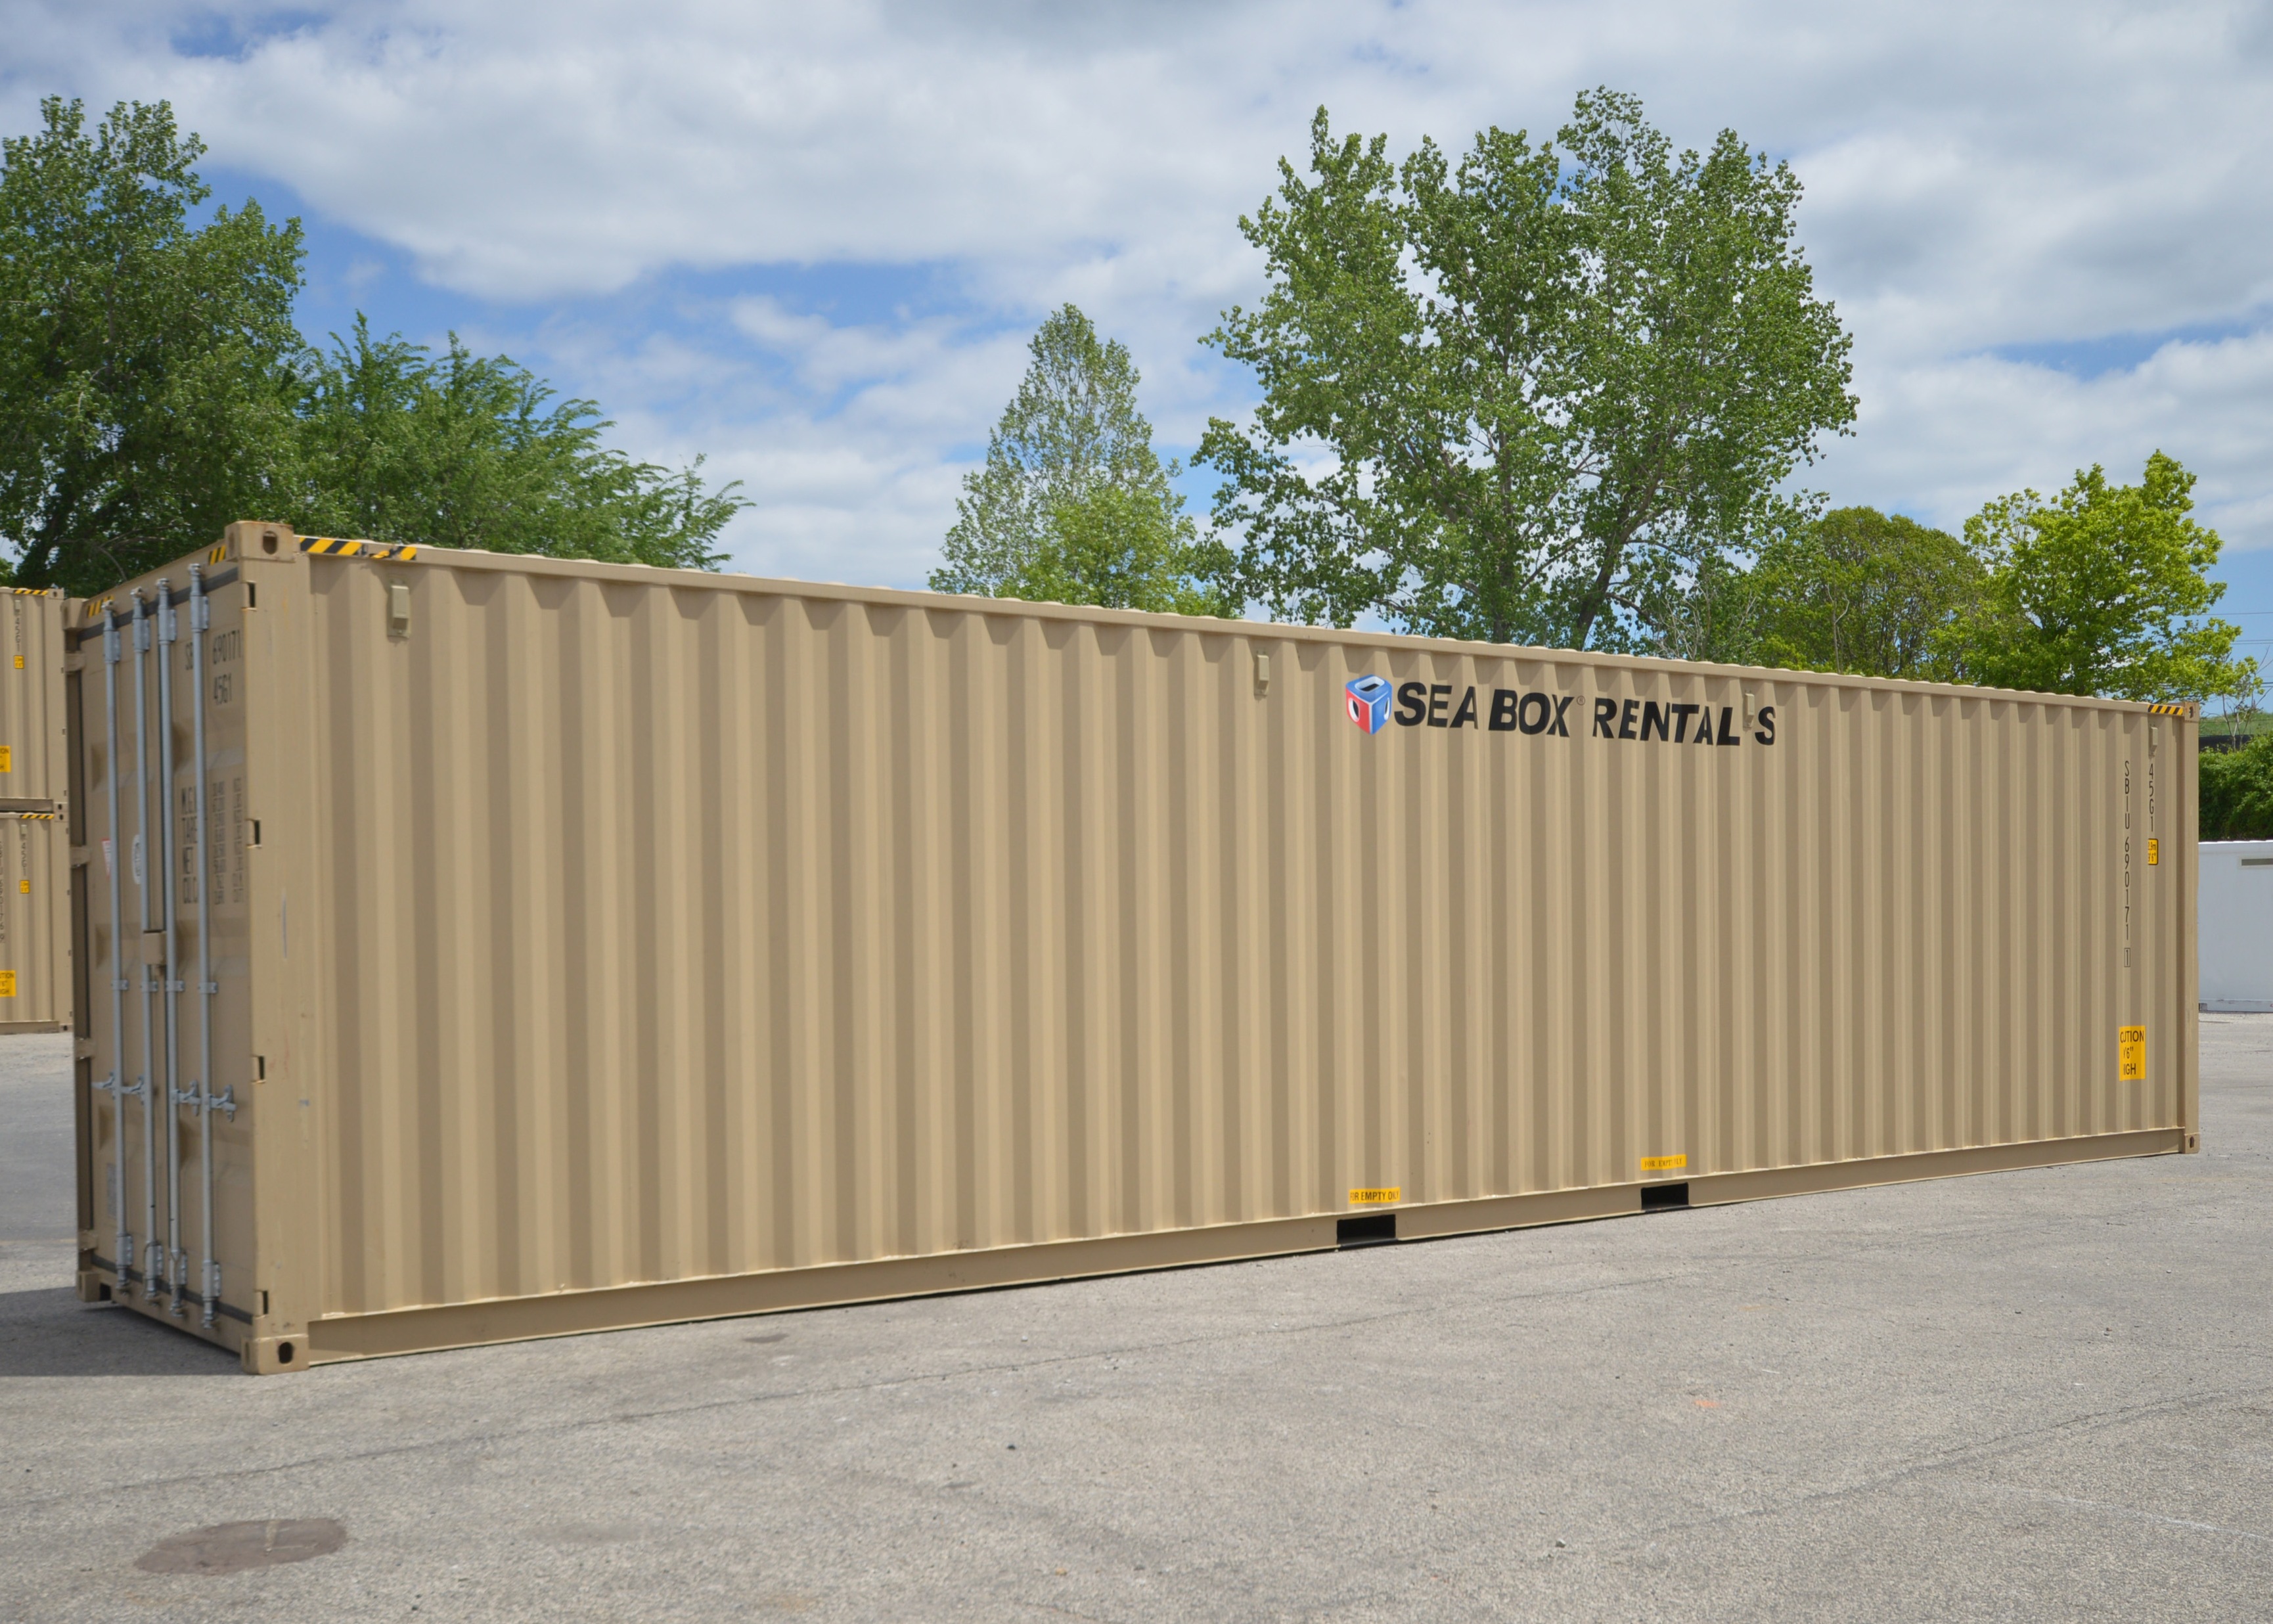 40’ x 9’6” Dry Freight Container Rental